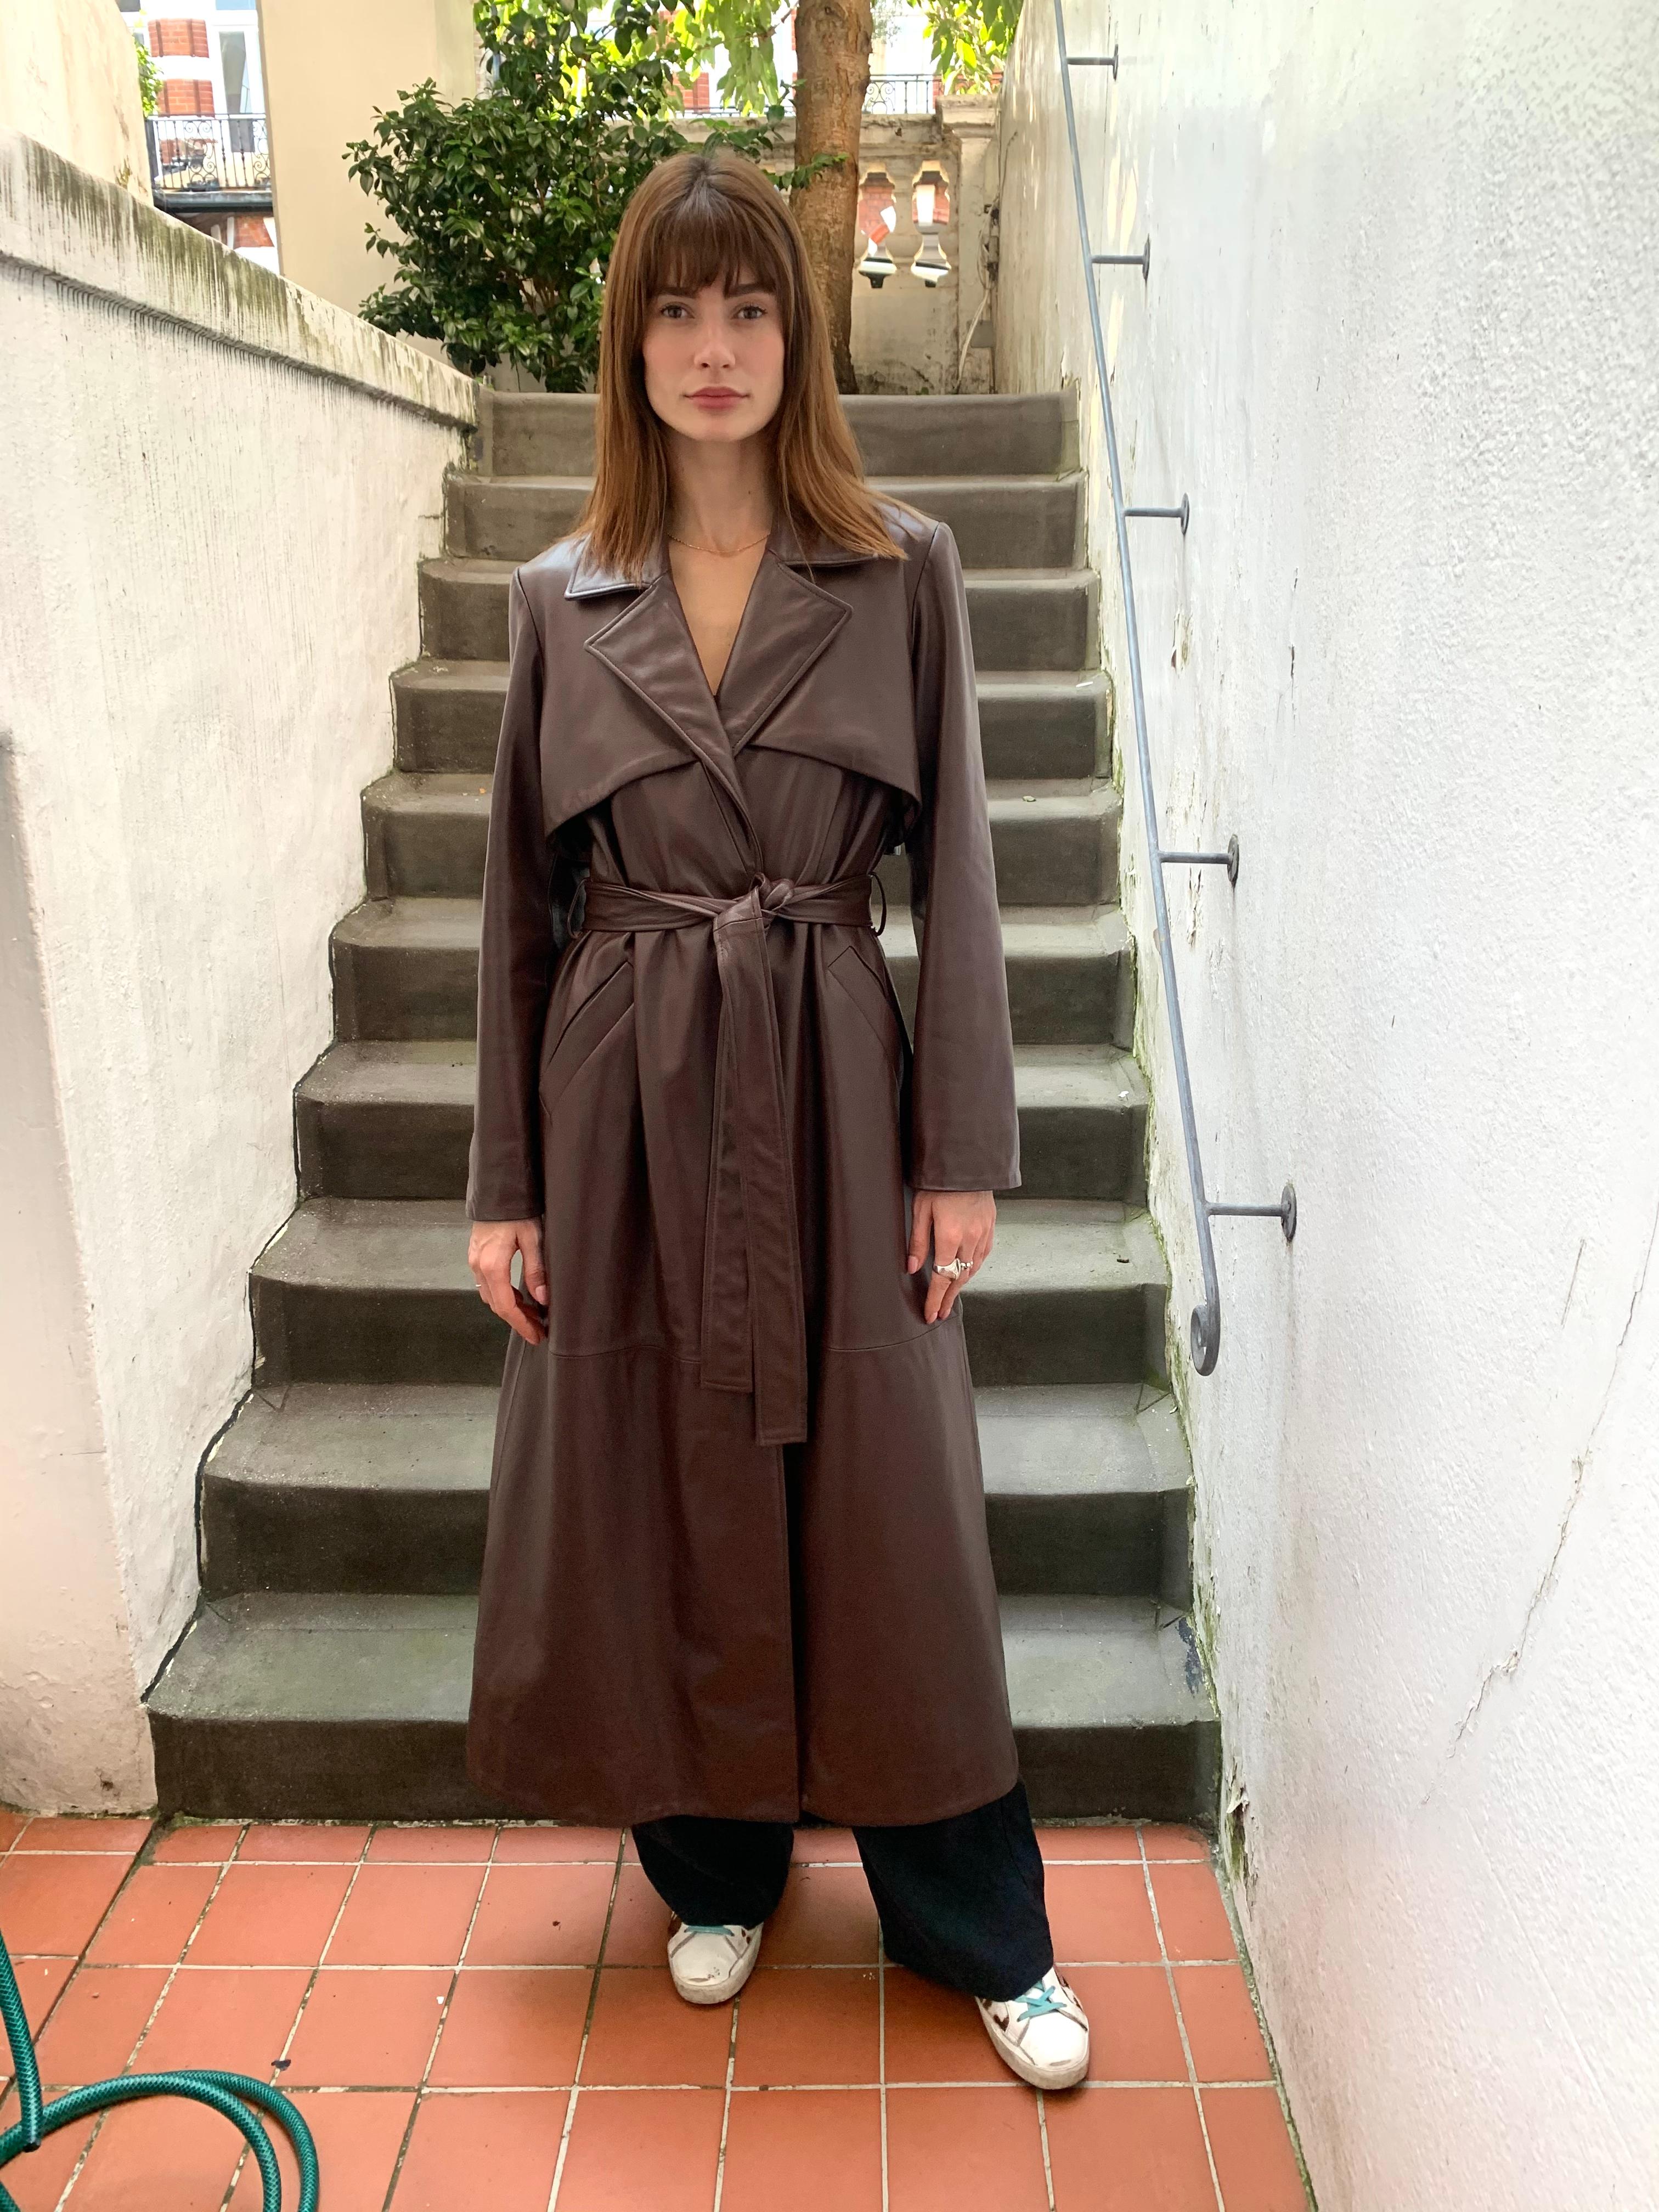 Verheyen London Leather Trench Coat in Chocolate Brown - Size uk 8 For Sale 1